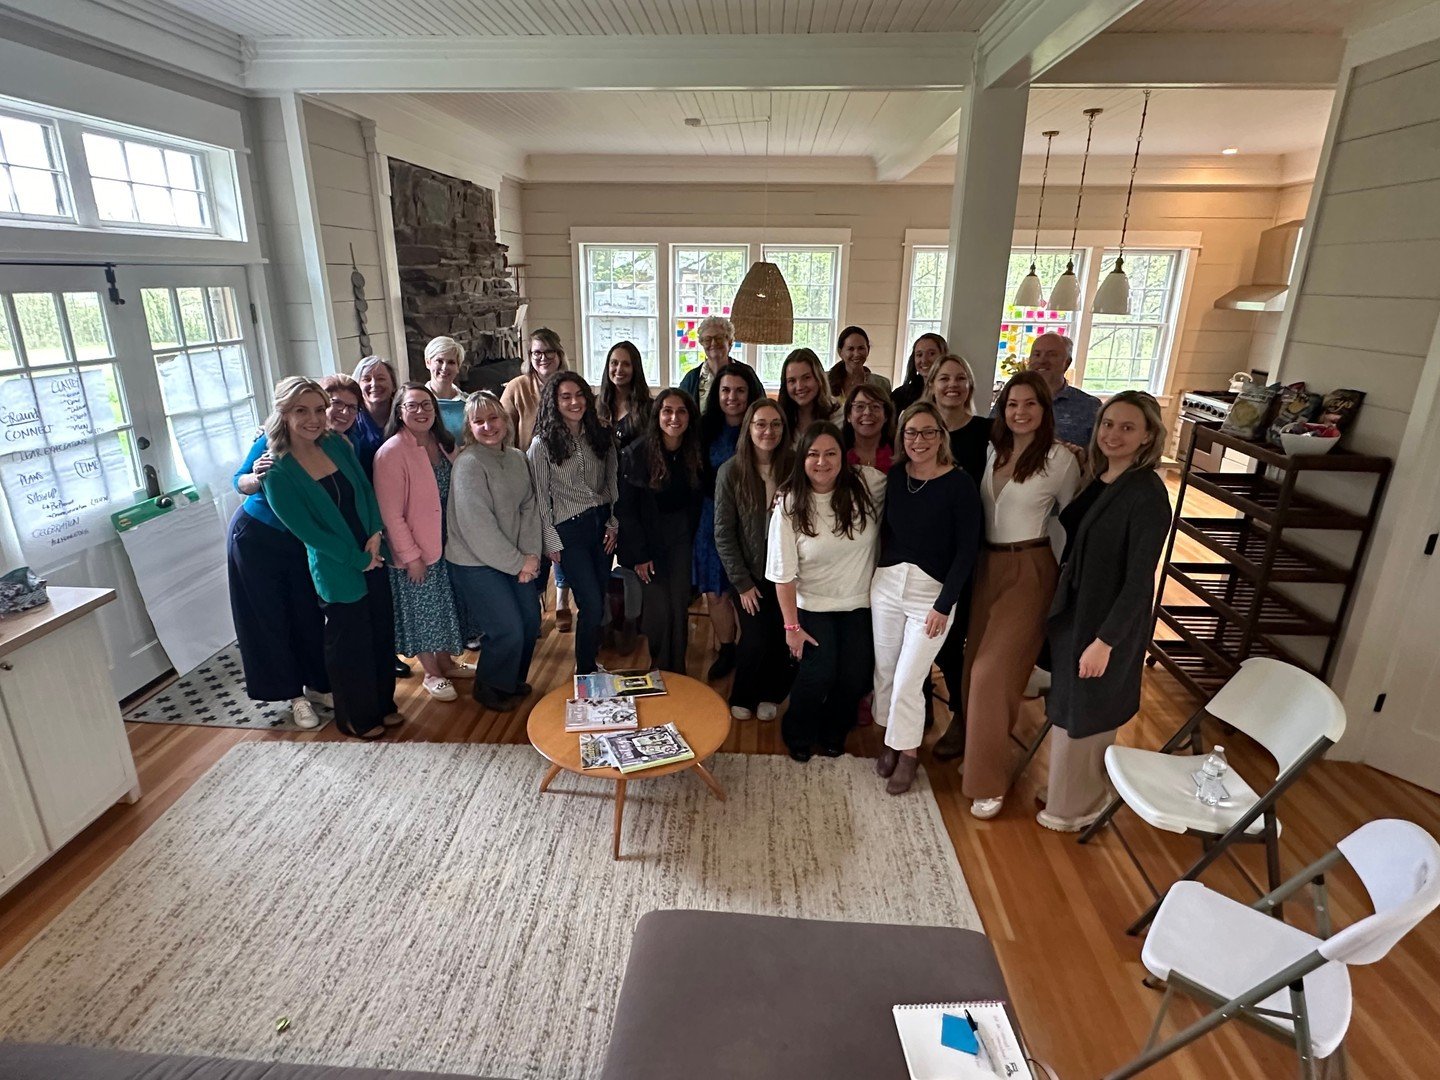 Each spring, our team gathers in Vermont for a day of learning, brainstorming, and inspiring each other. We call this event our Spring Connect. We gathered together for Spring Connect last week in Charlotte, VT, and discussed @junaprcommunications mi